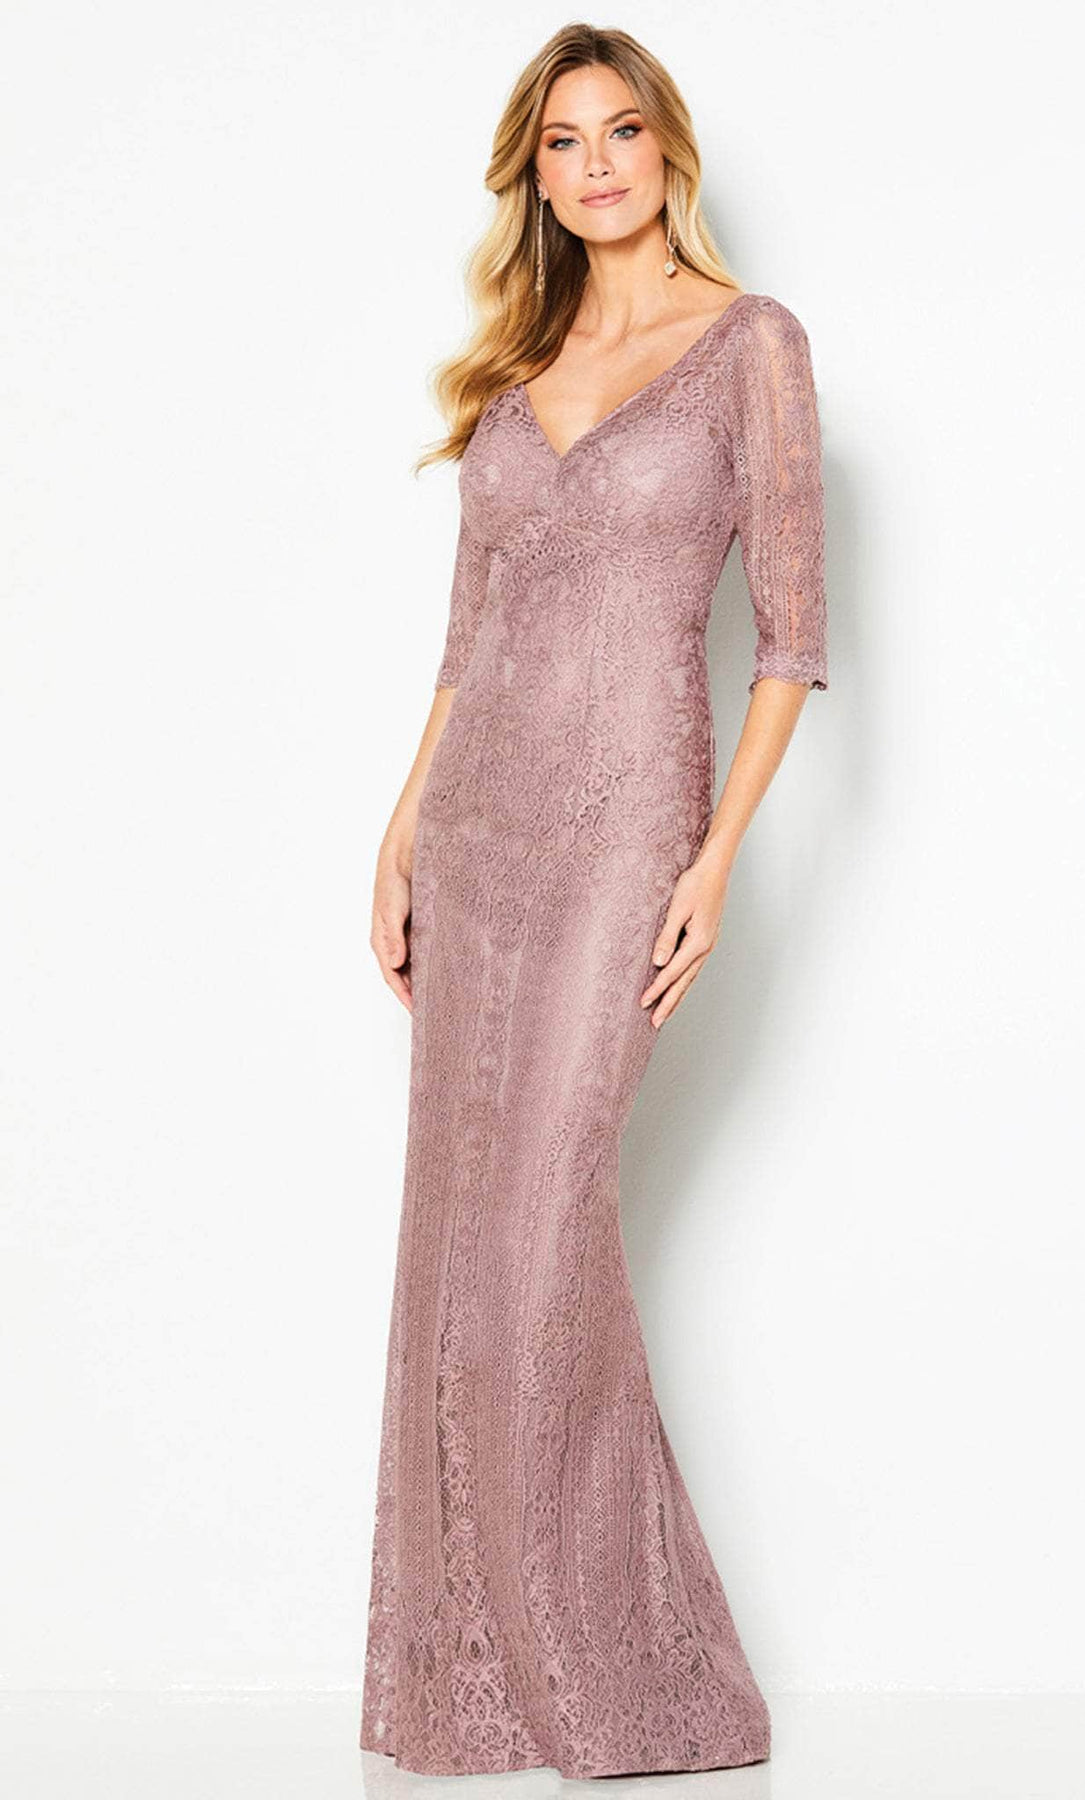 Cameron Blake 219679 - Embroidered Lace Dress